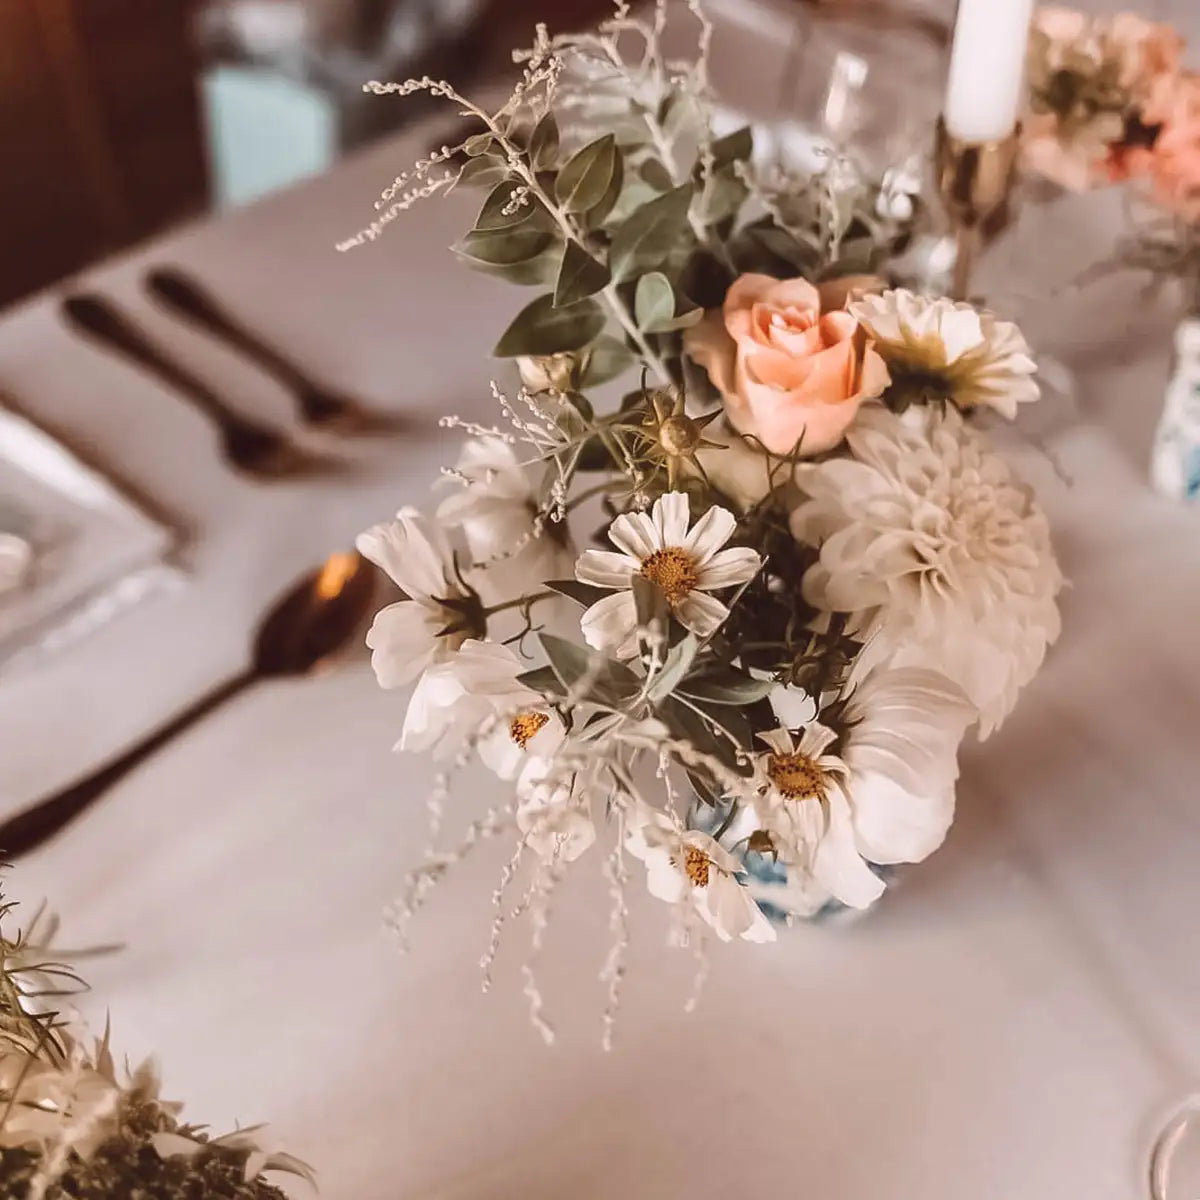 Close-up of an elegant table setting with a delicate floral arrangement featuring white daisies and peach roses. Perfect for events. Fabulous Flowers and Gifts.